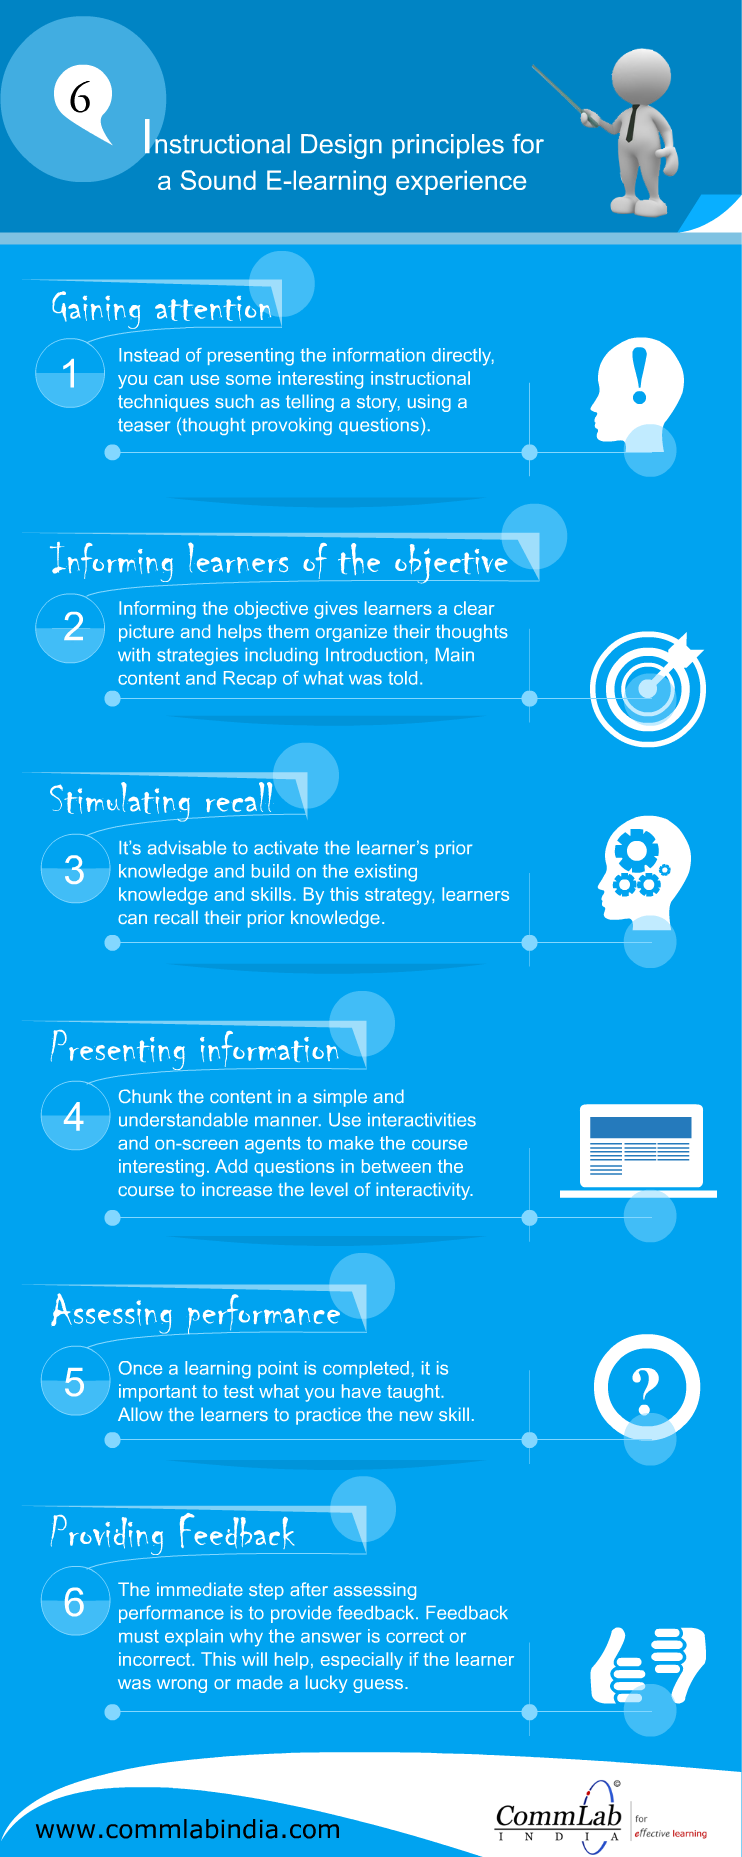 6 Instructional Design Principles For a Sound Learning Experience - An Infographic